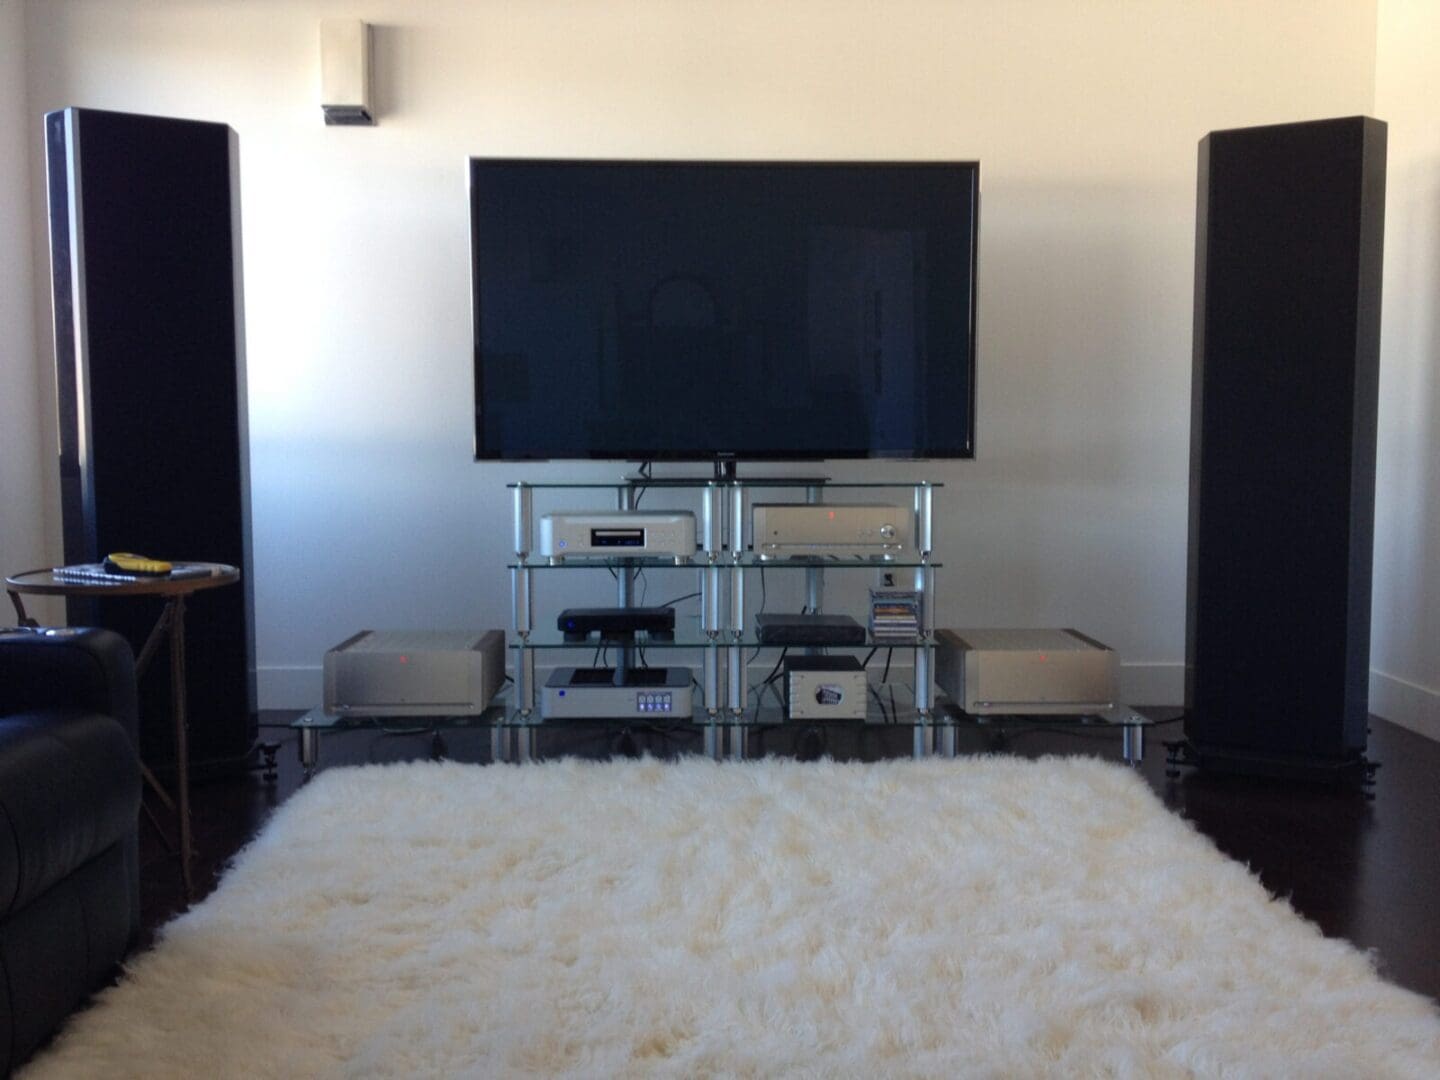 The Sound Station in Bartlesville client's Stereo System